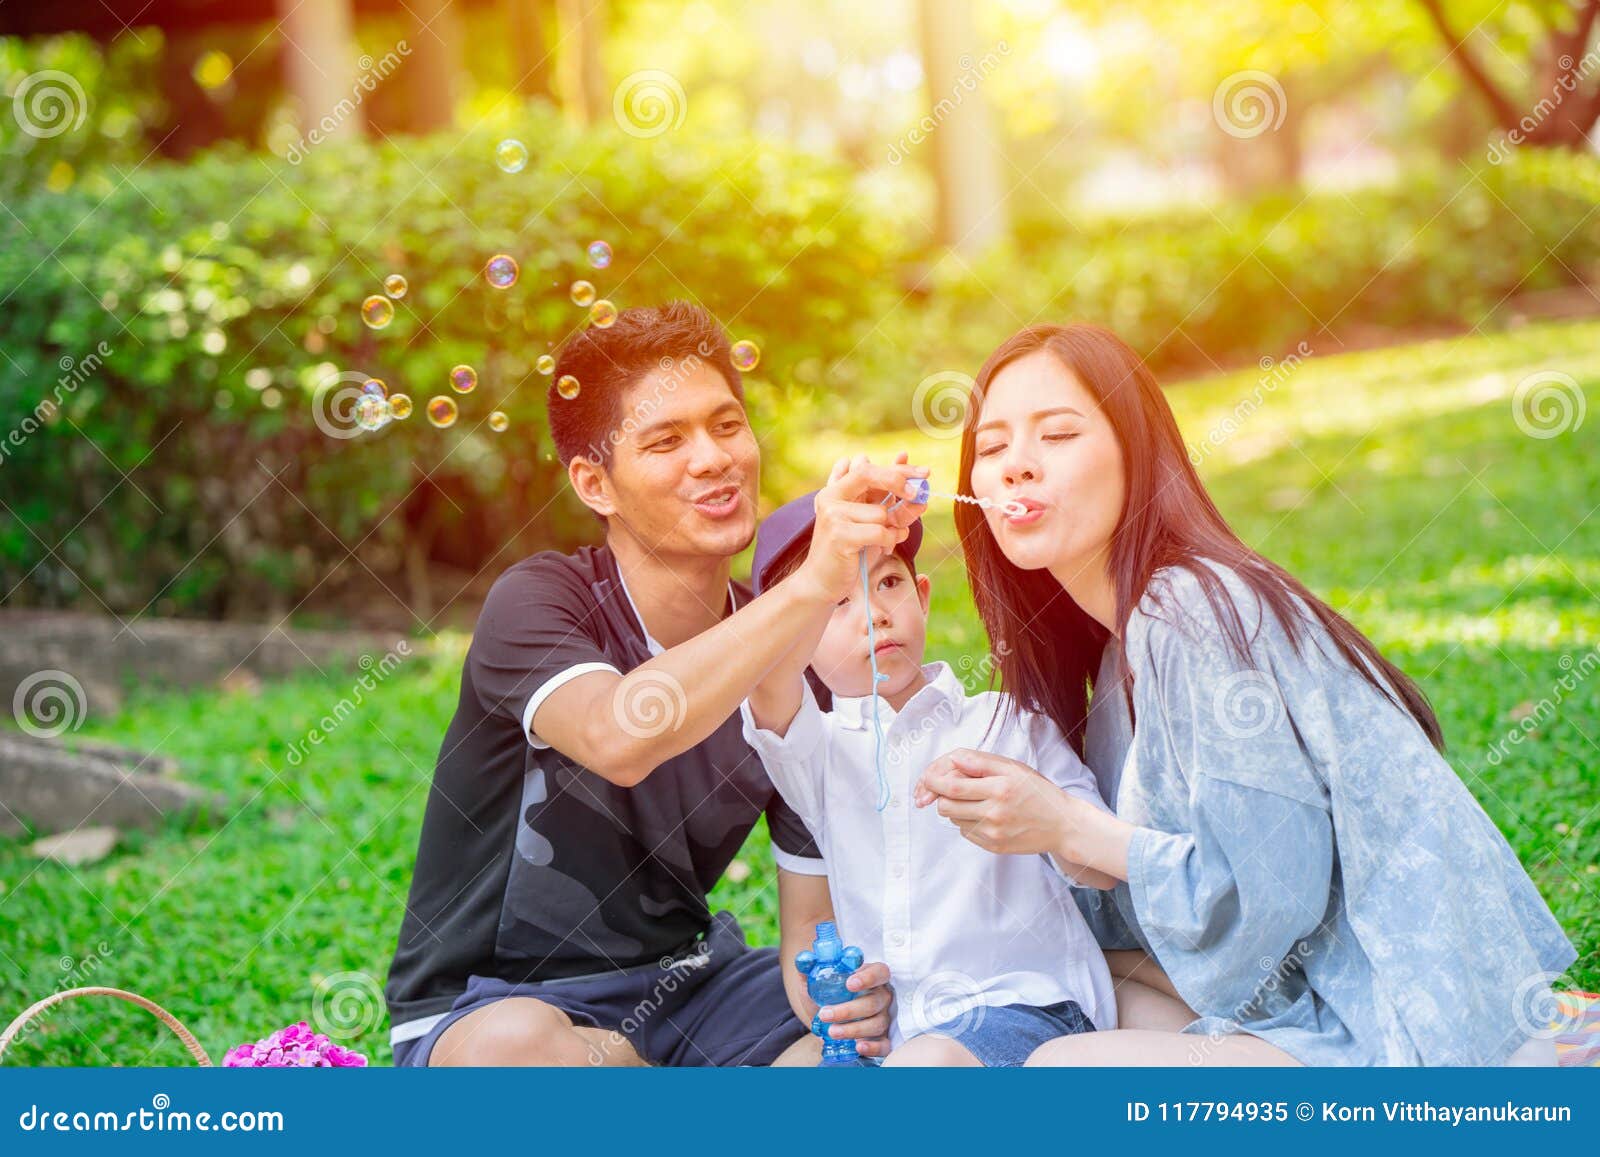 asian teen family one kid happy holiday picnic moment in the park